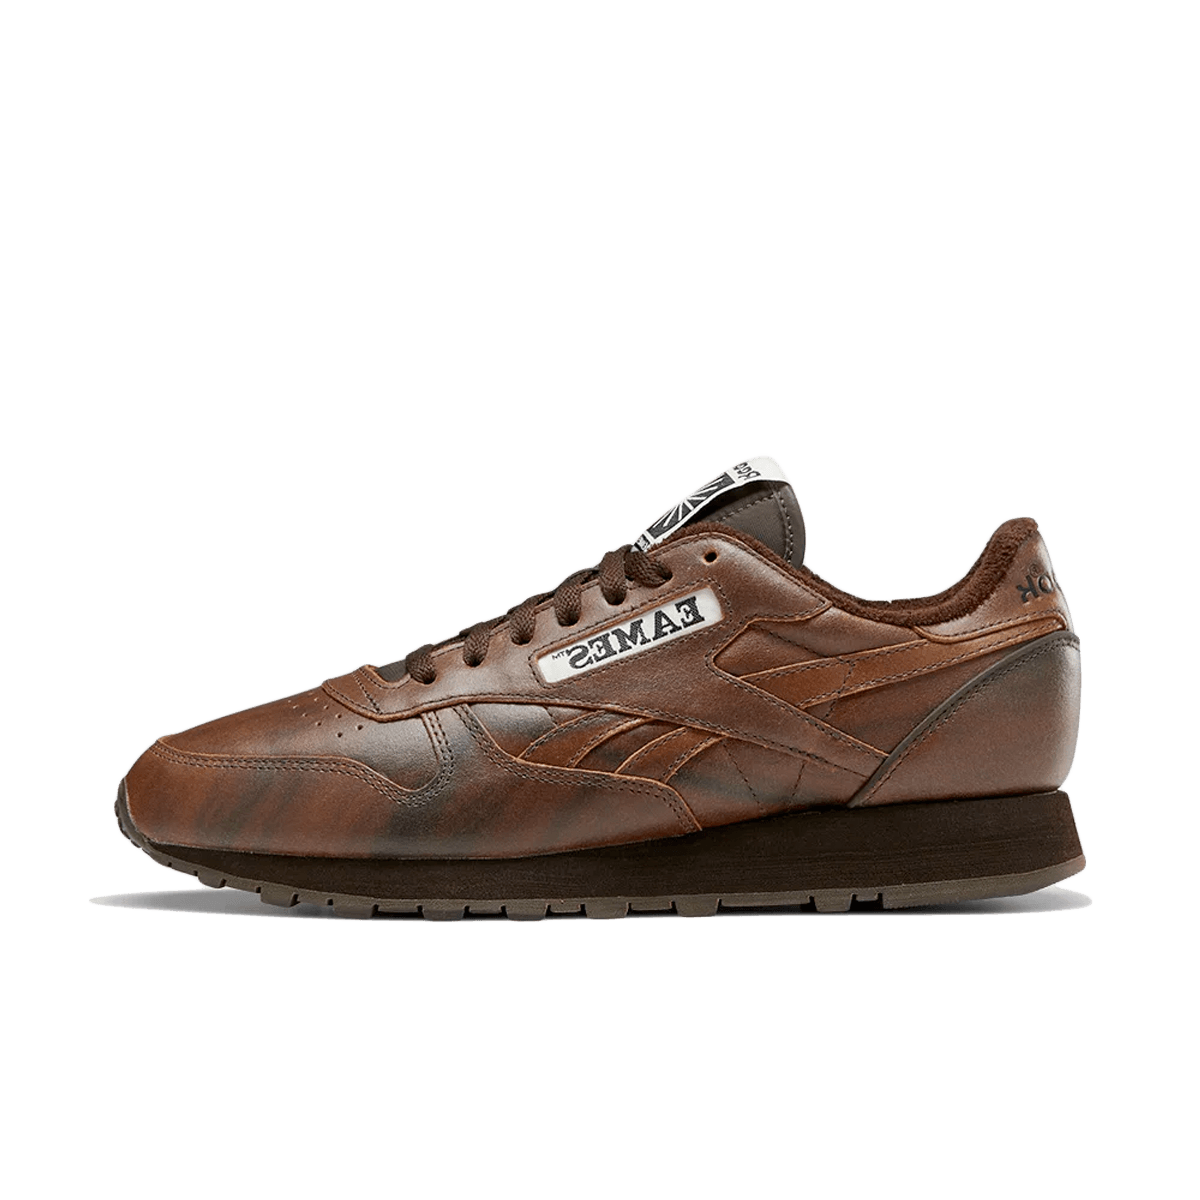 Eames x Reebok Classic Leather 'Brown' GY7391